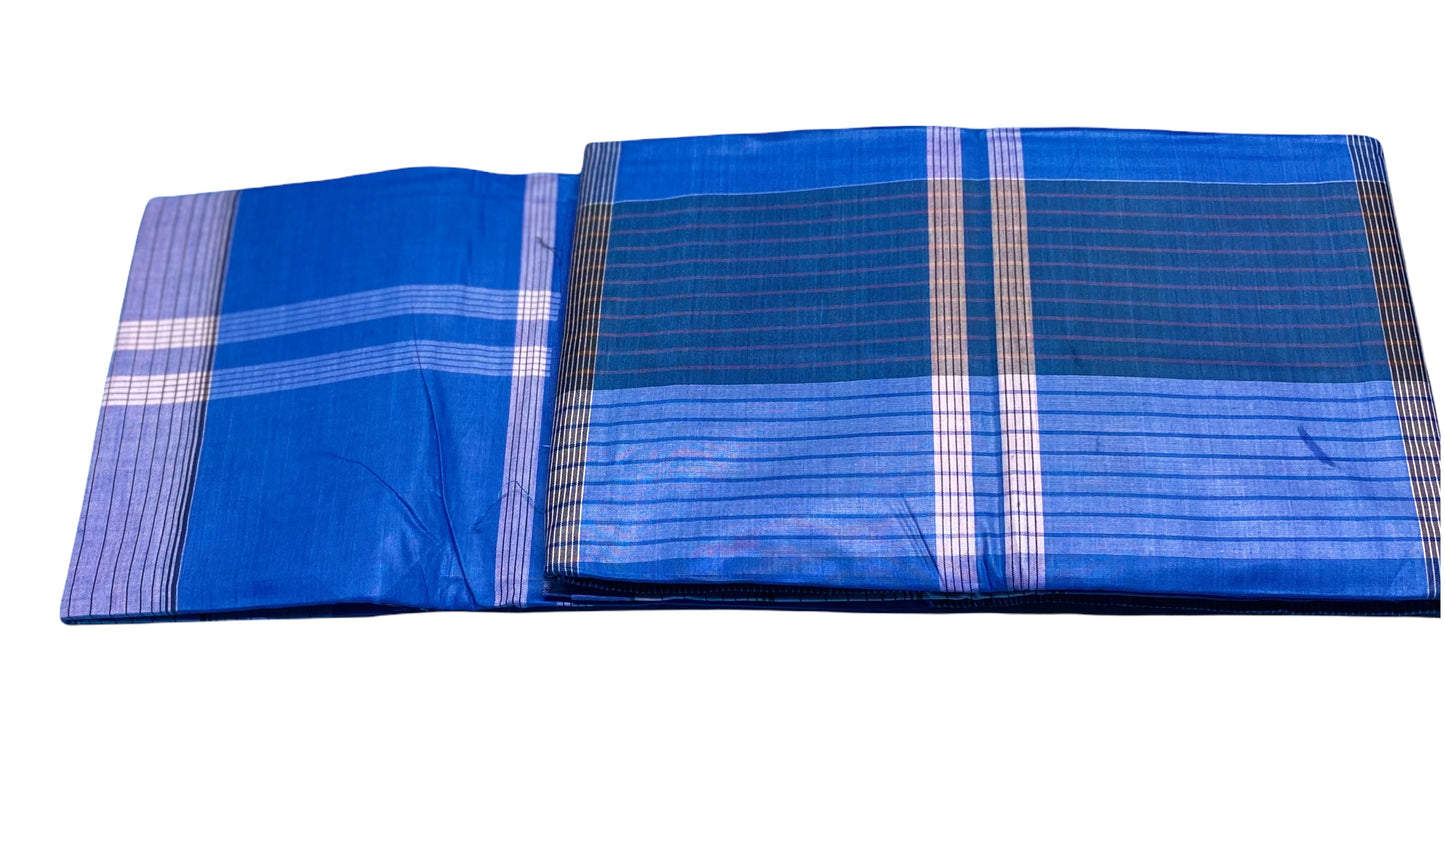 Breezy and Breathable: Cotton Lungi for Ultimate Comfort in Any Season